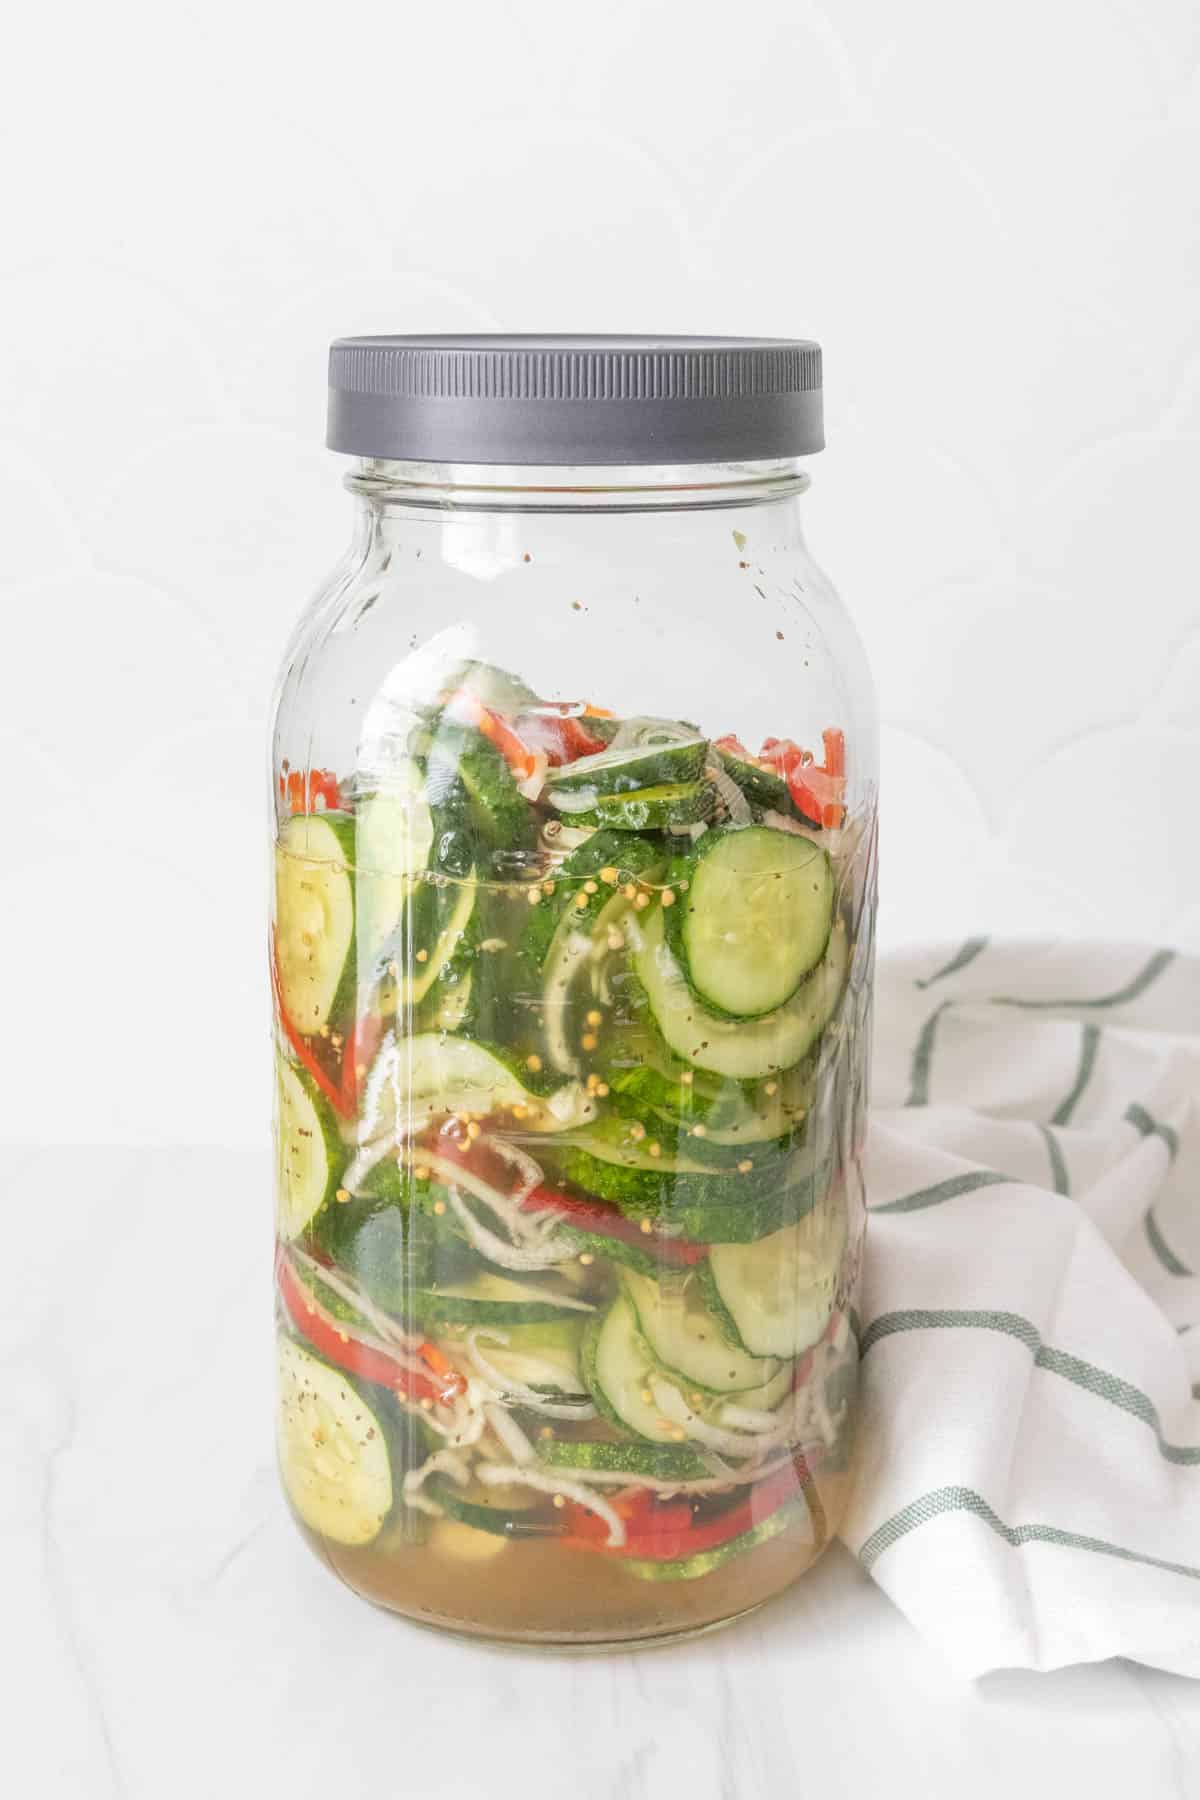 A jar with cucumbers and vegetables in it.